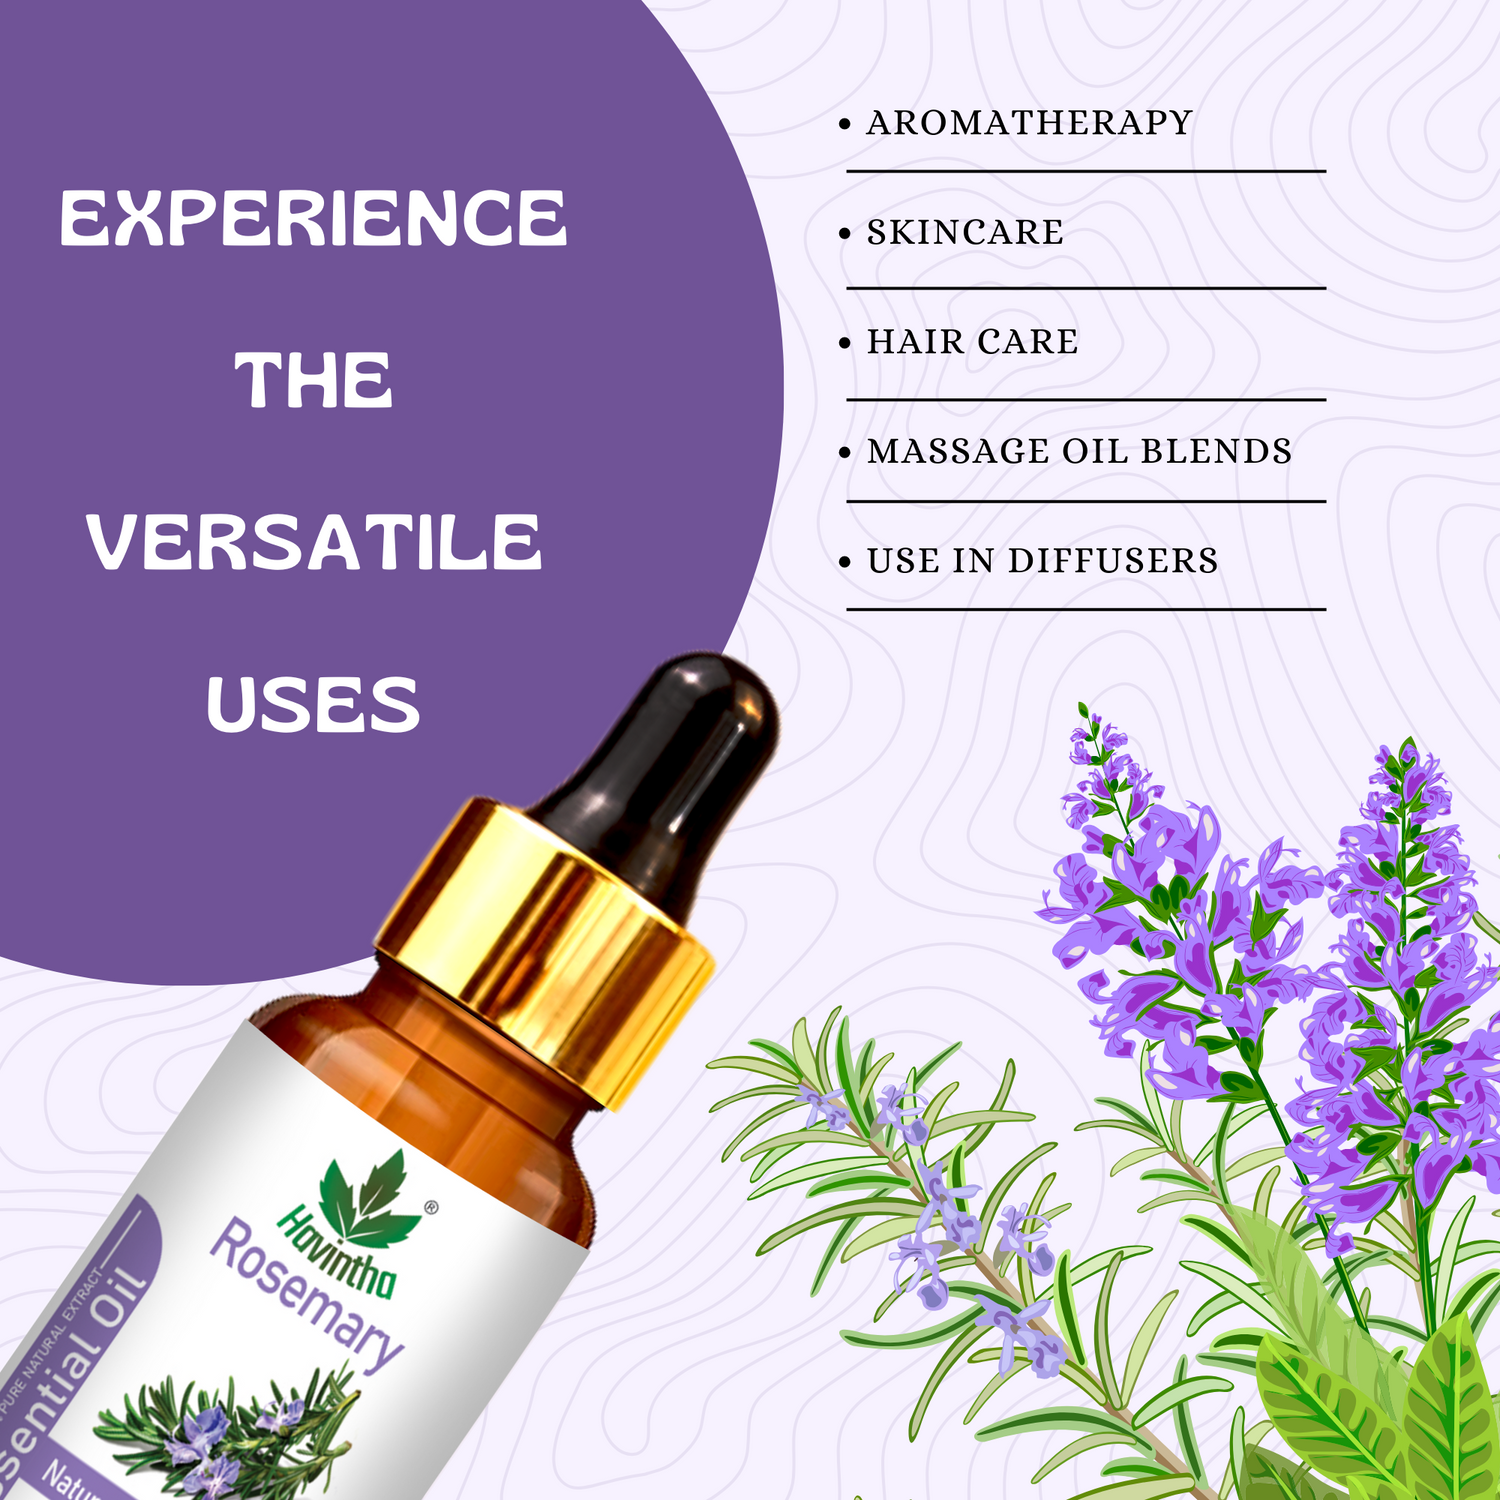 Havintha Natural Rosemary Essential Oil for Hair and Skin care | 100 % pure Aroma - 15 ml.  (15 ml)